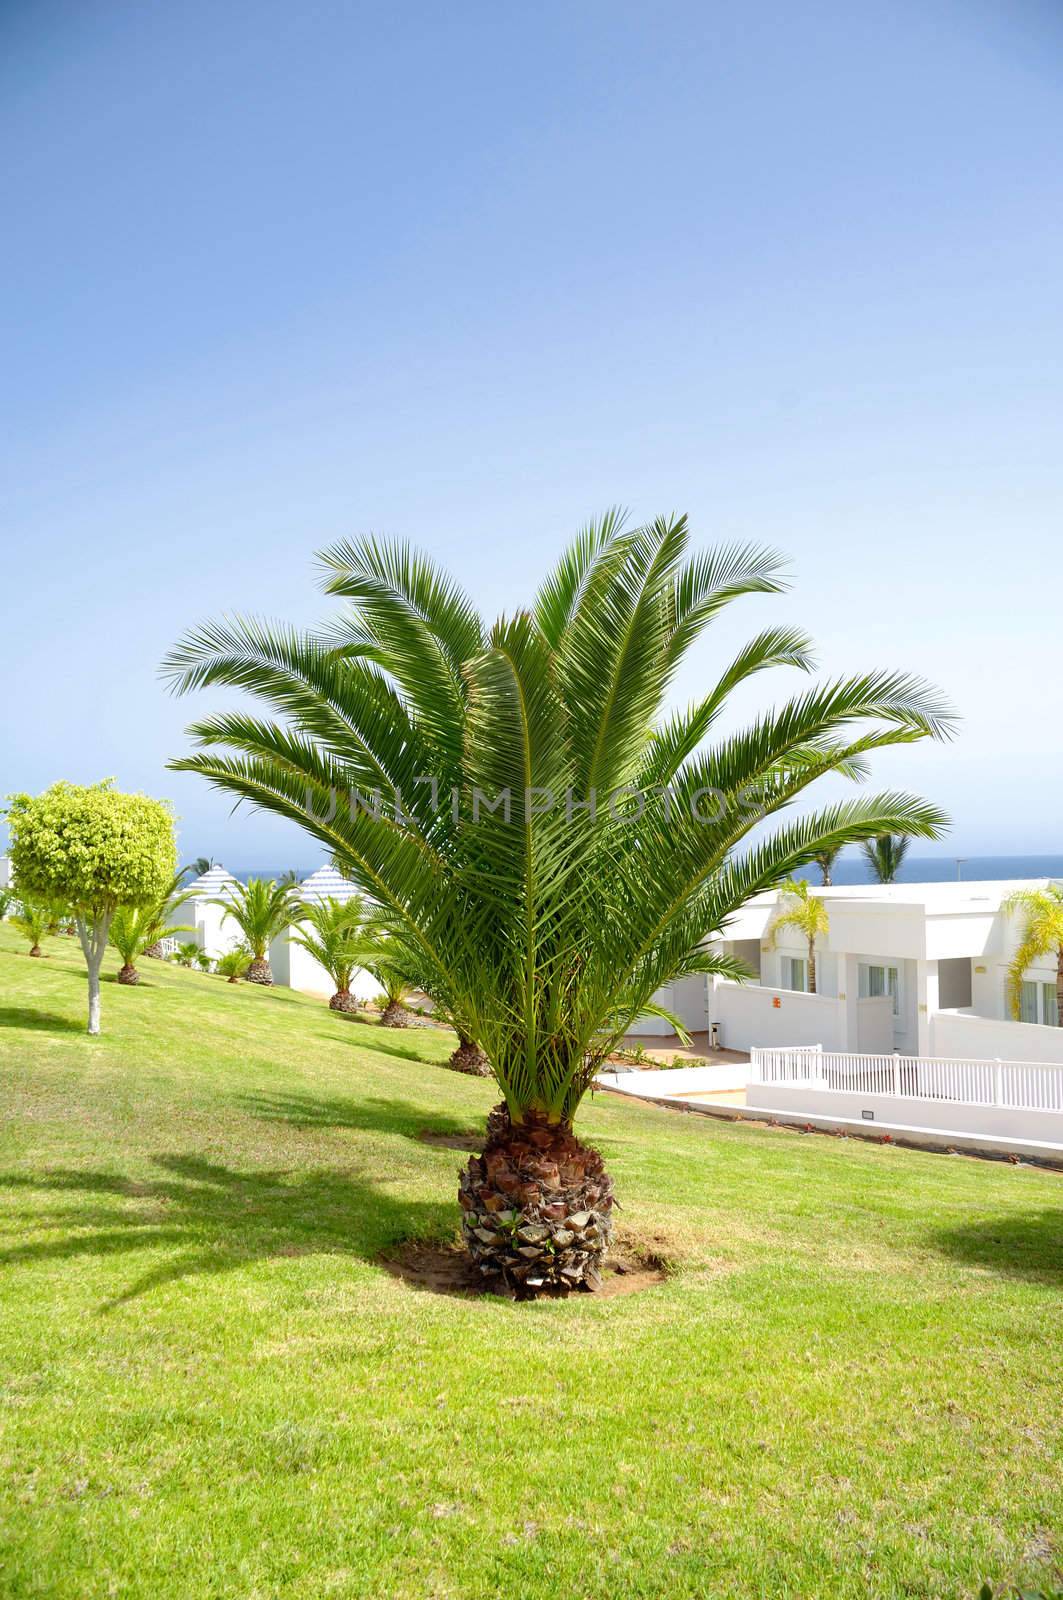 Palms in a nice garden with white houses in the background.